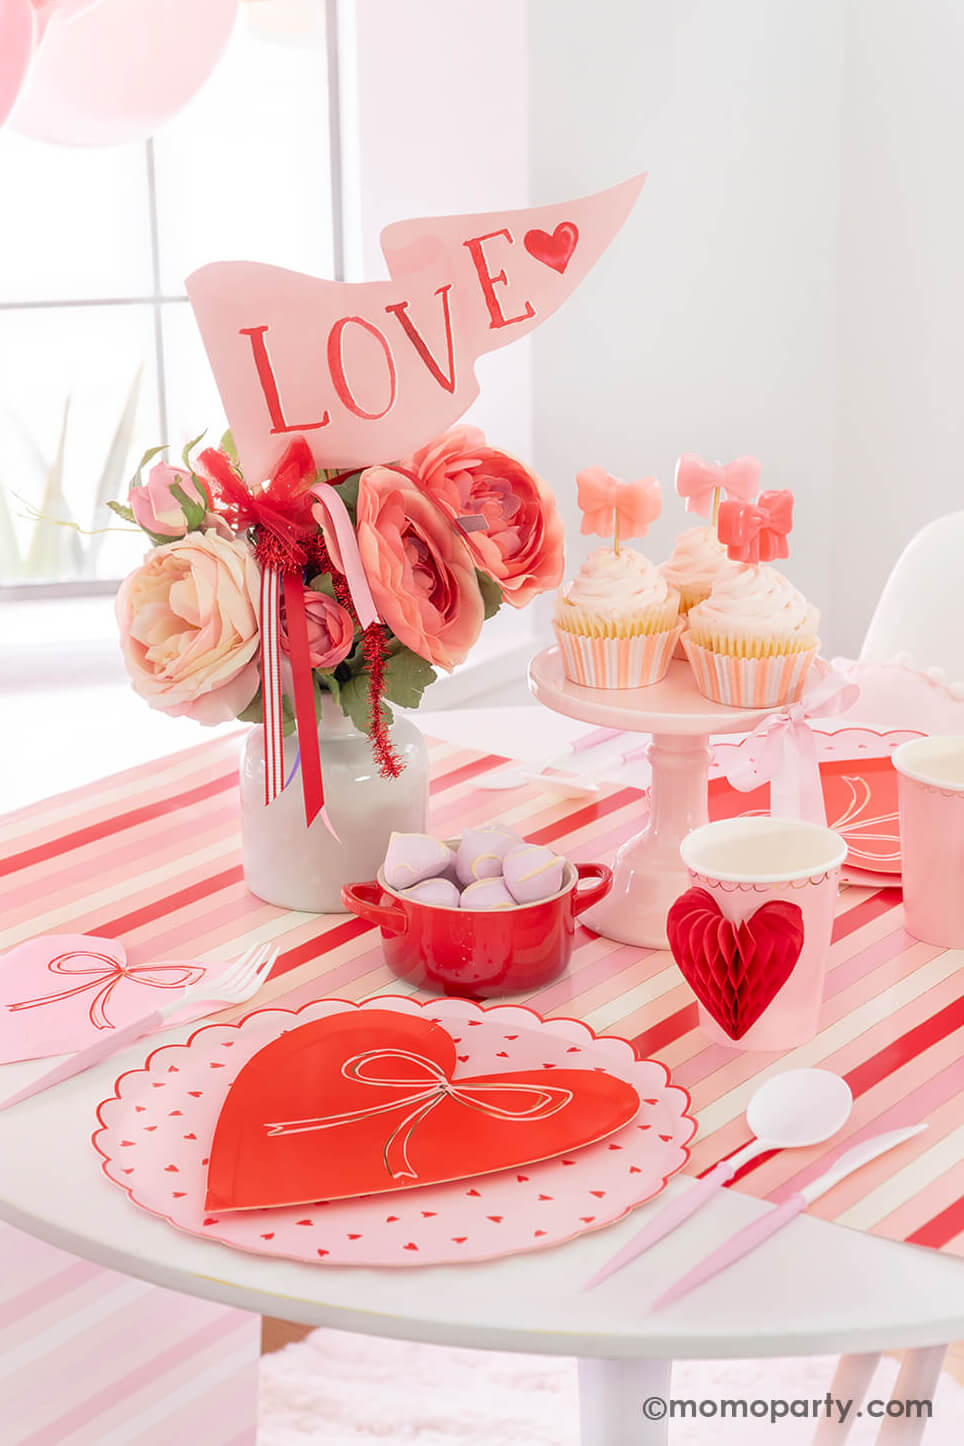 Momo Party presents A Bow-Themed Valentine's Day Table: This Bow-tastic Table Setting is filled with Meri Meri Heart Pattern Dinner Plates layered with Bow Plates and matching napkins, Honeycomb Heart Cups, Blush and White Cutlery Set, Pink Bow Candles on cupcakes, and a Love Party Pennant in the flower vase, all elegantly arranged on a red-striped paper runner. What a modern and cute idea for your Valentine's or Galentine's celebration with besties."